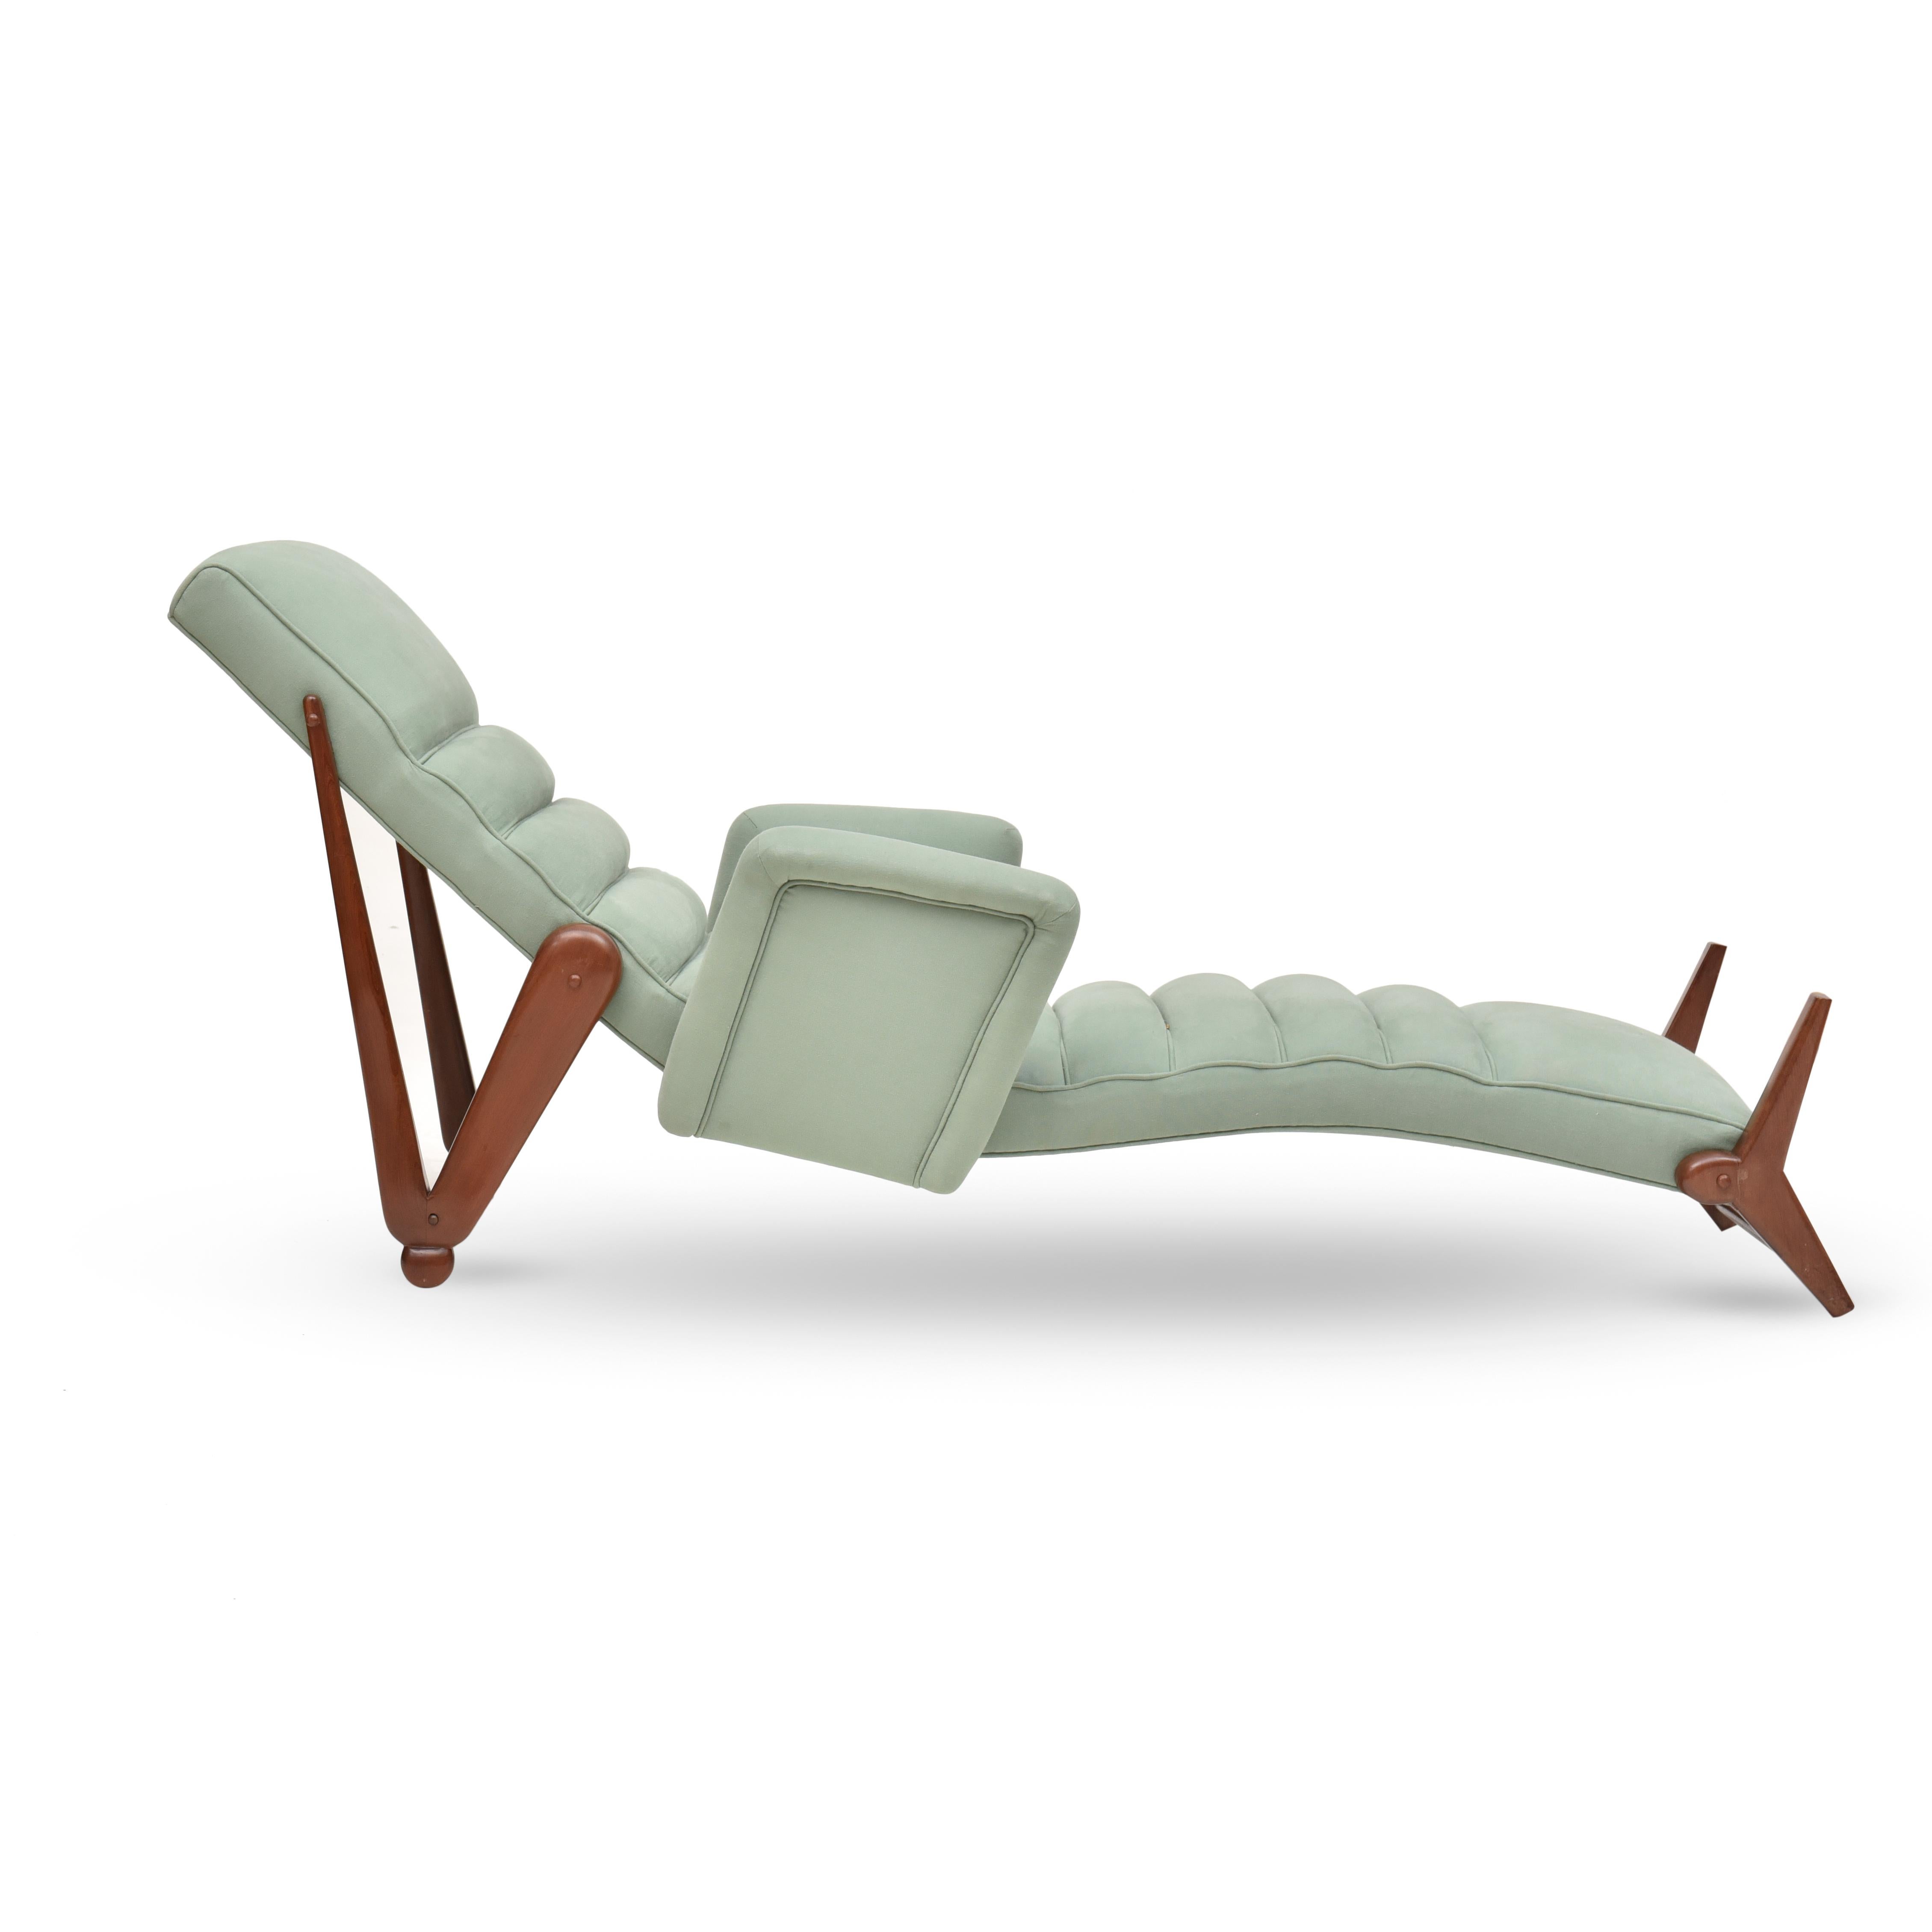 Mid-20th Century Chaise Longue in Caviuna, by Giuseppe Scapinelli For Sale